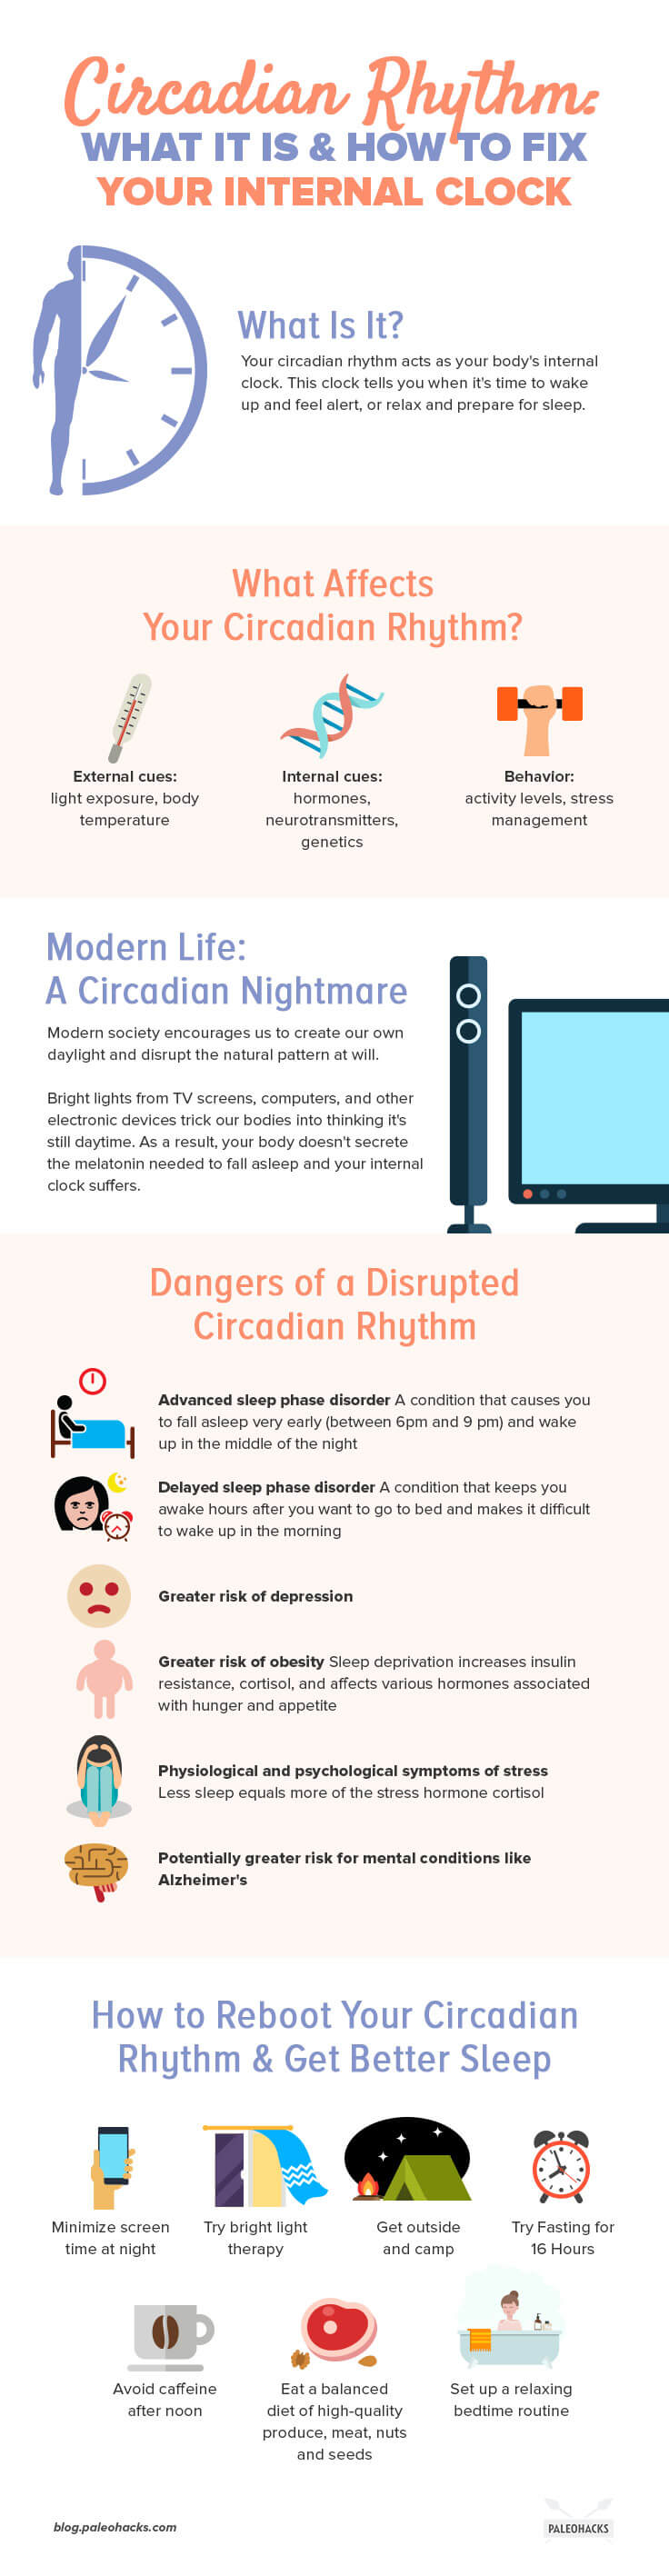 The culprit of your exhaustion may be a broken circadian rhythm. Learn to hack light exposure so you can sleep better and wake up more energetic than ever!